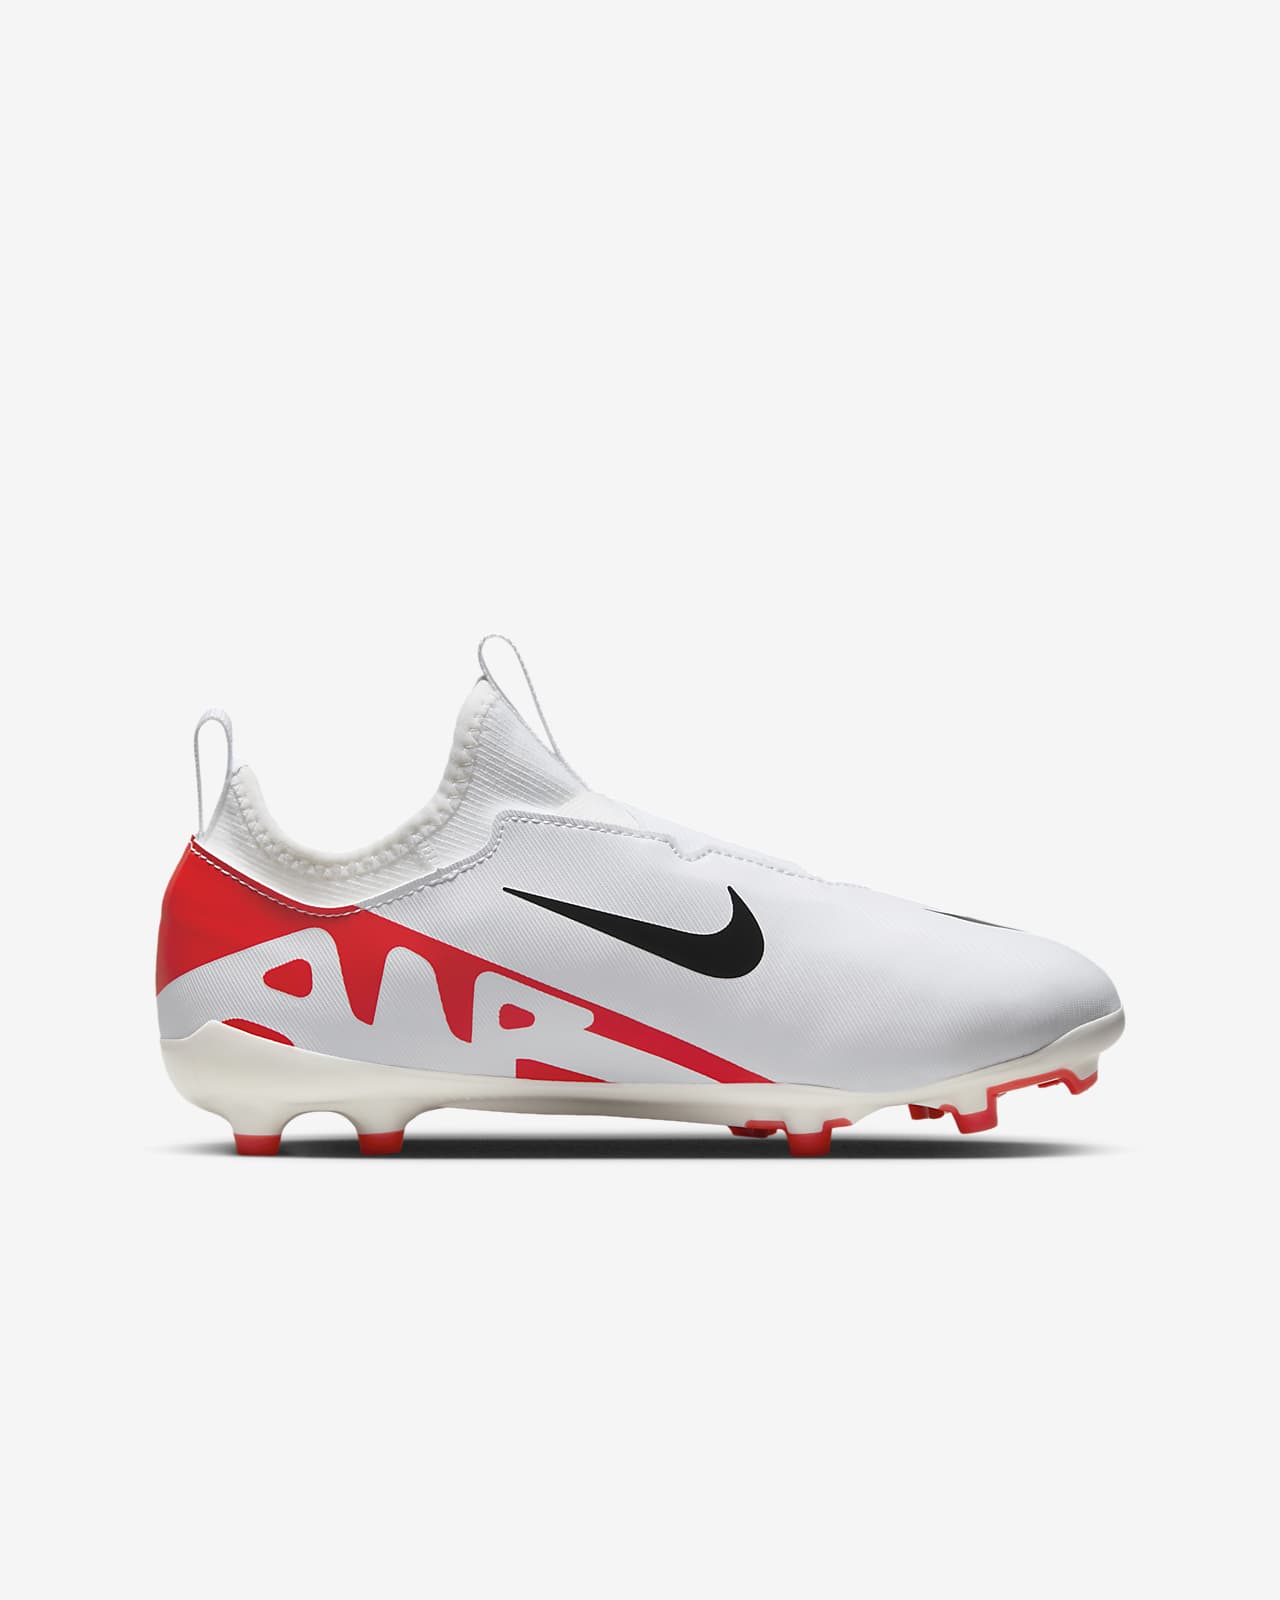 Where to buy the Nike Football Generation pack? Price, release date, and  more explored